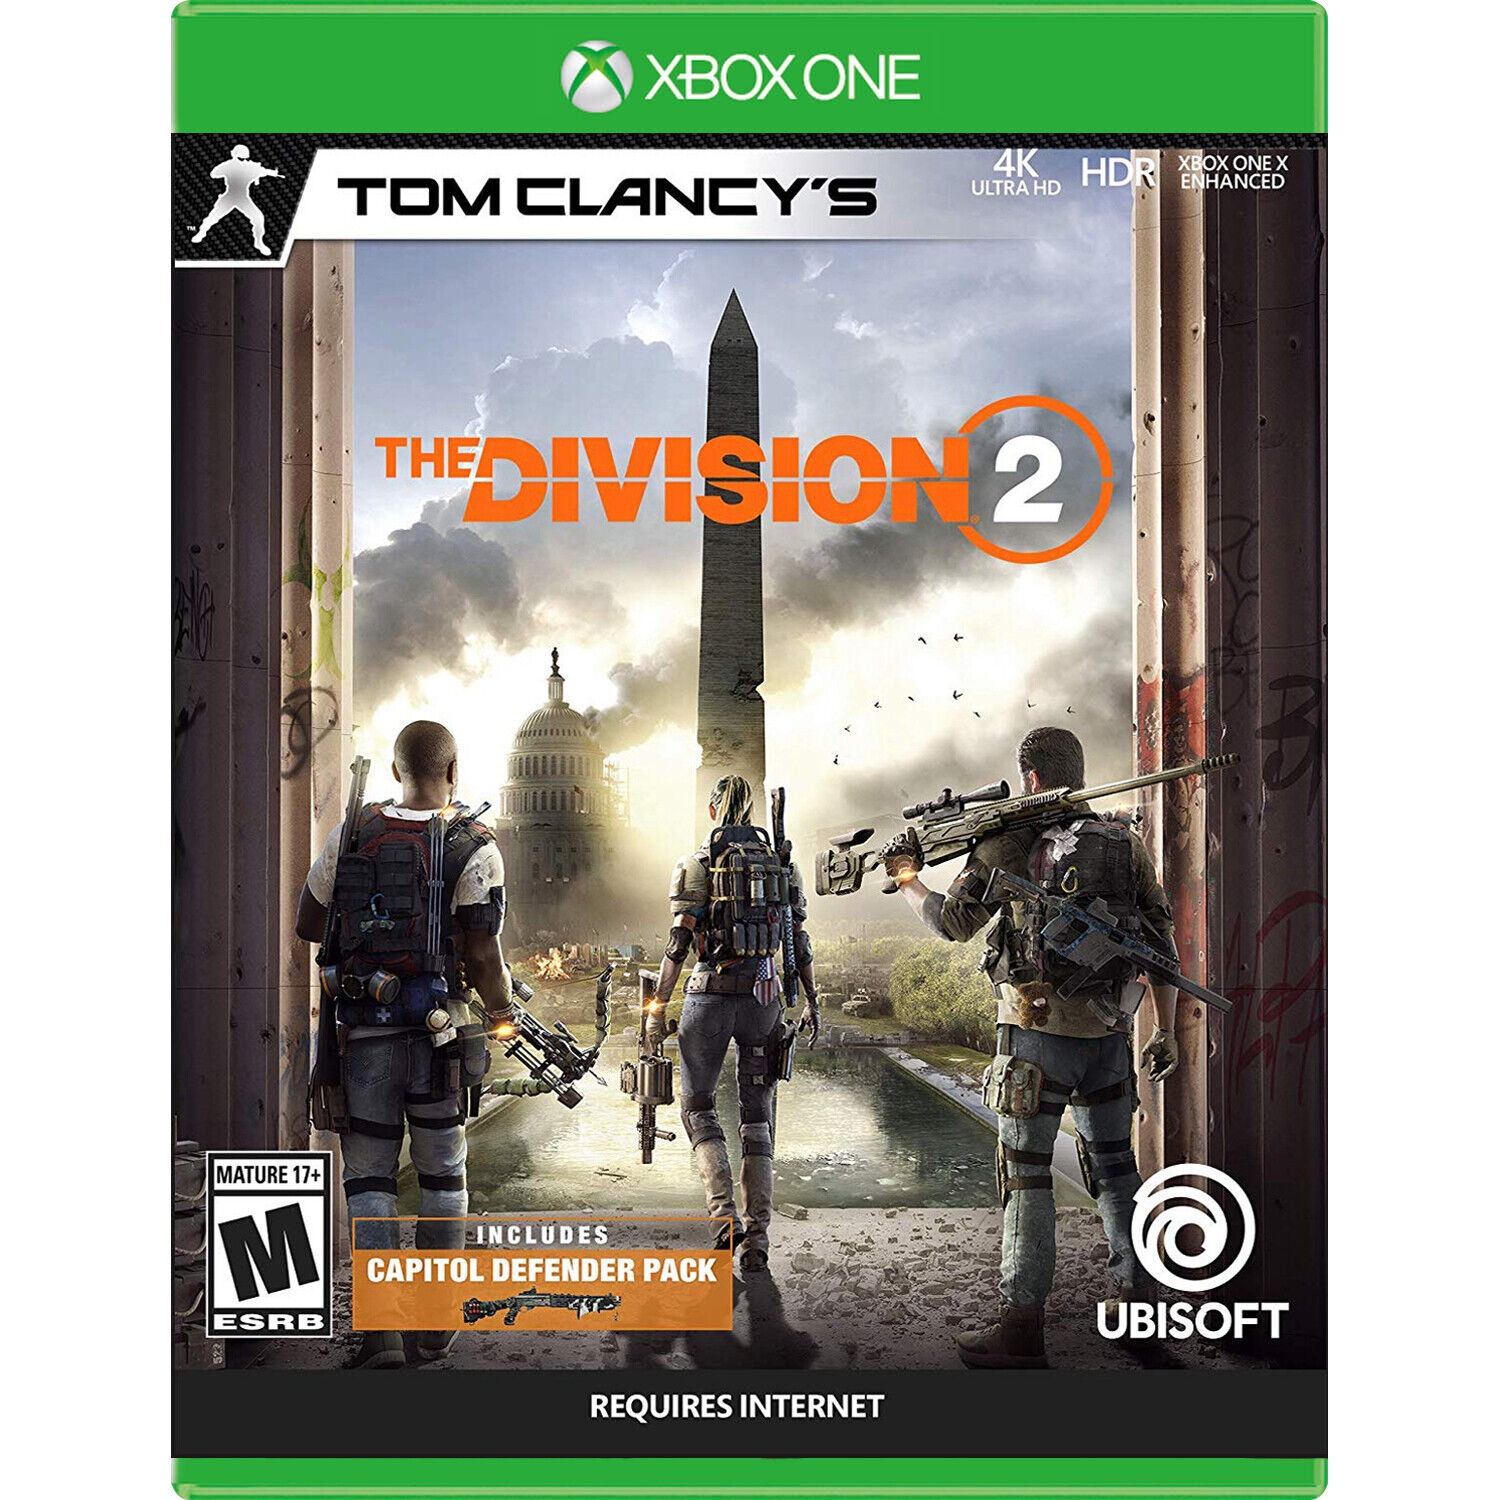 Tom Clancy's The Division 2 for Xbox One [VIDEOGAMES]